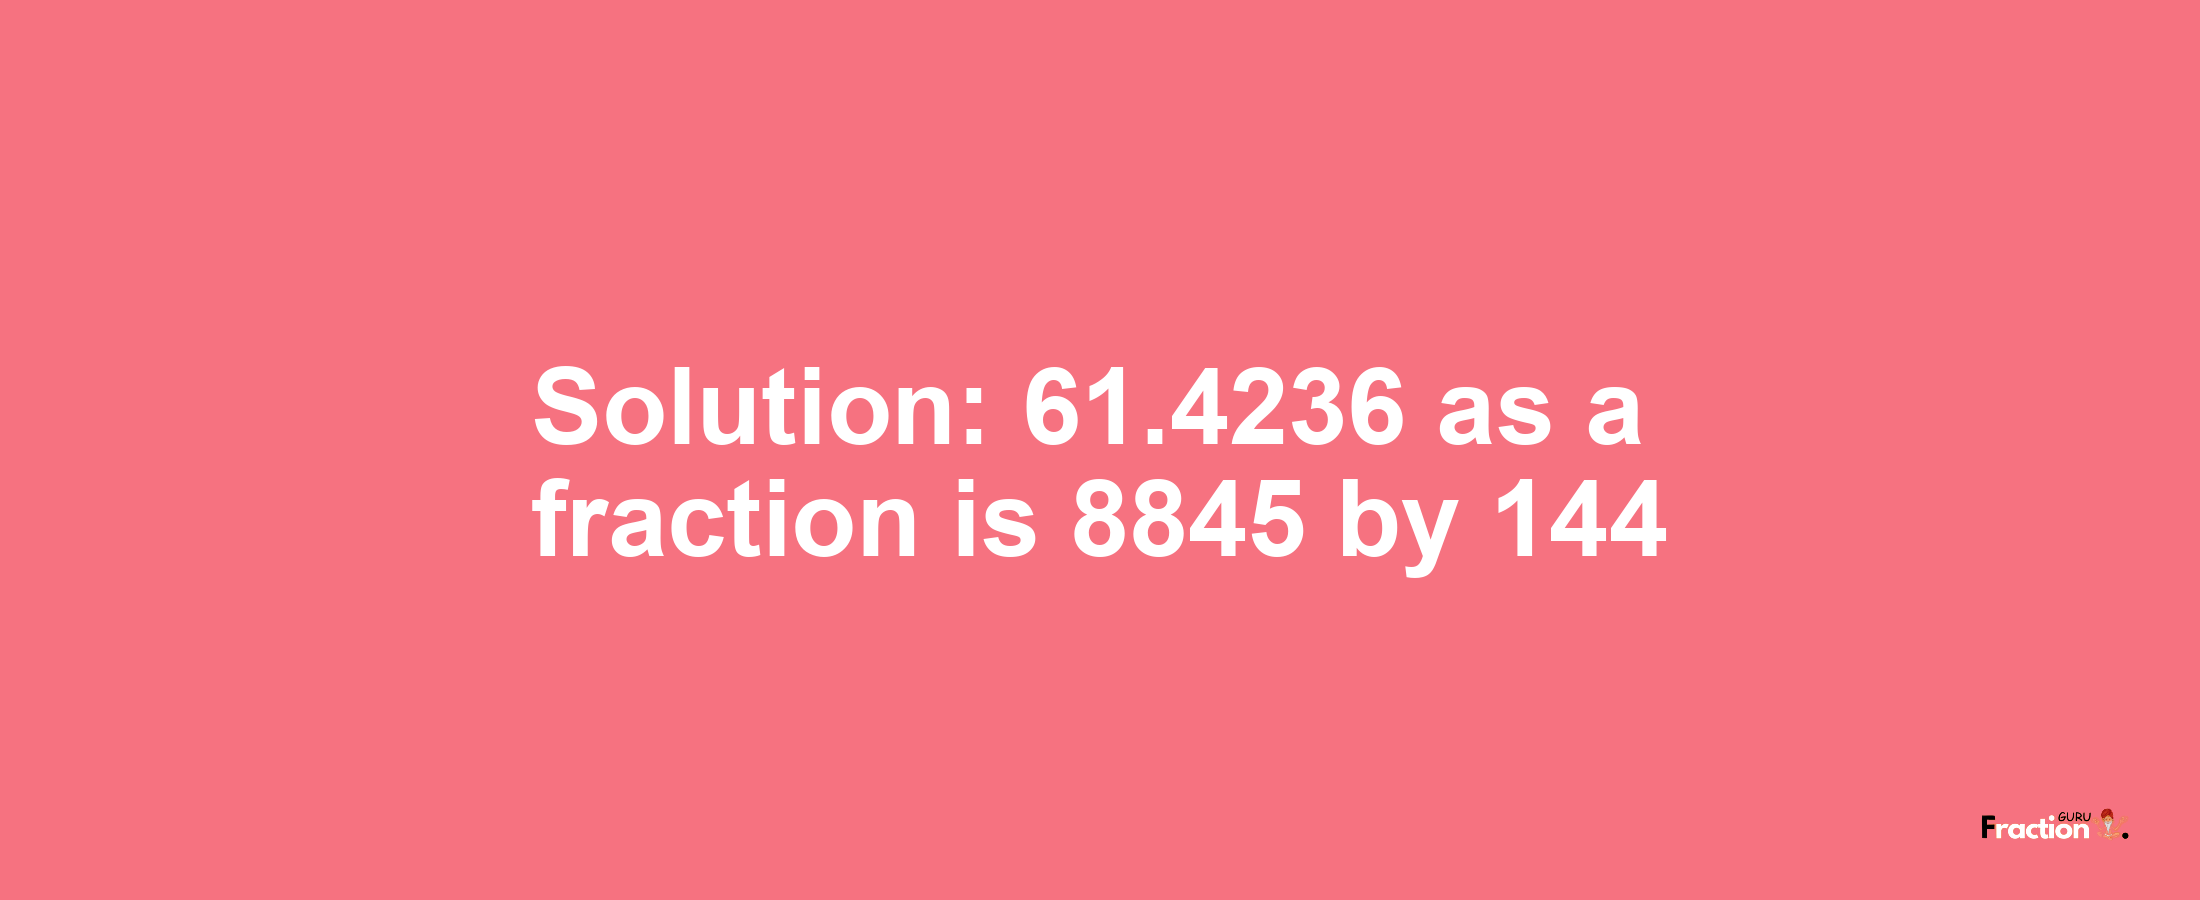 Solution:61.4236 as a fraction is 8845/144